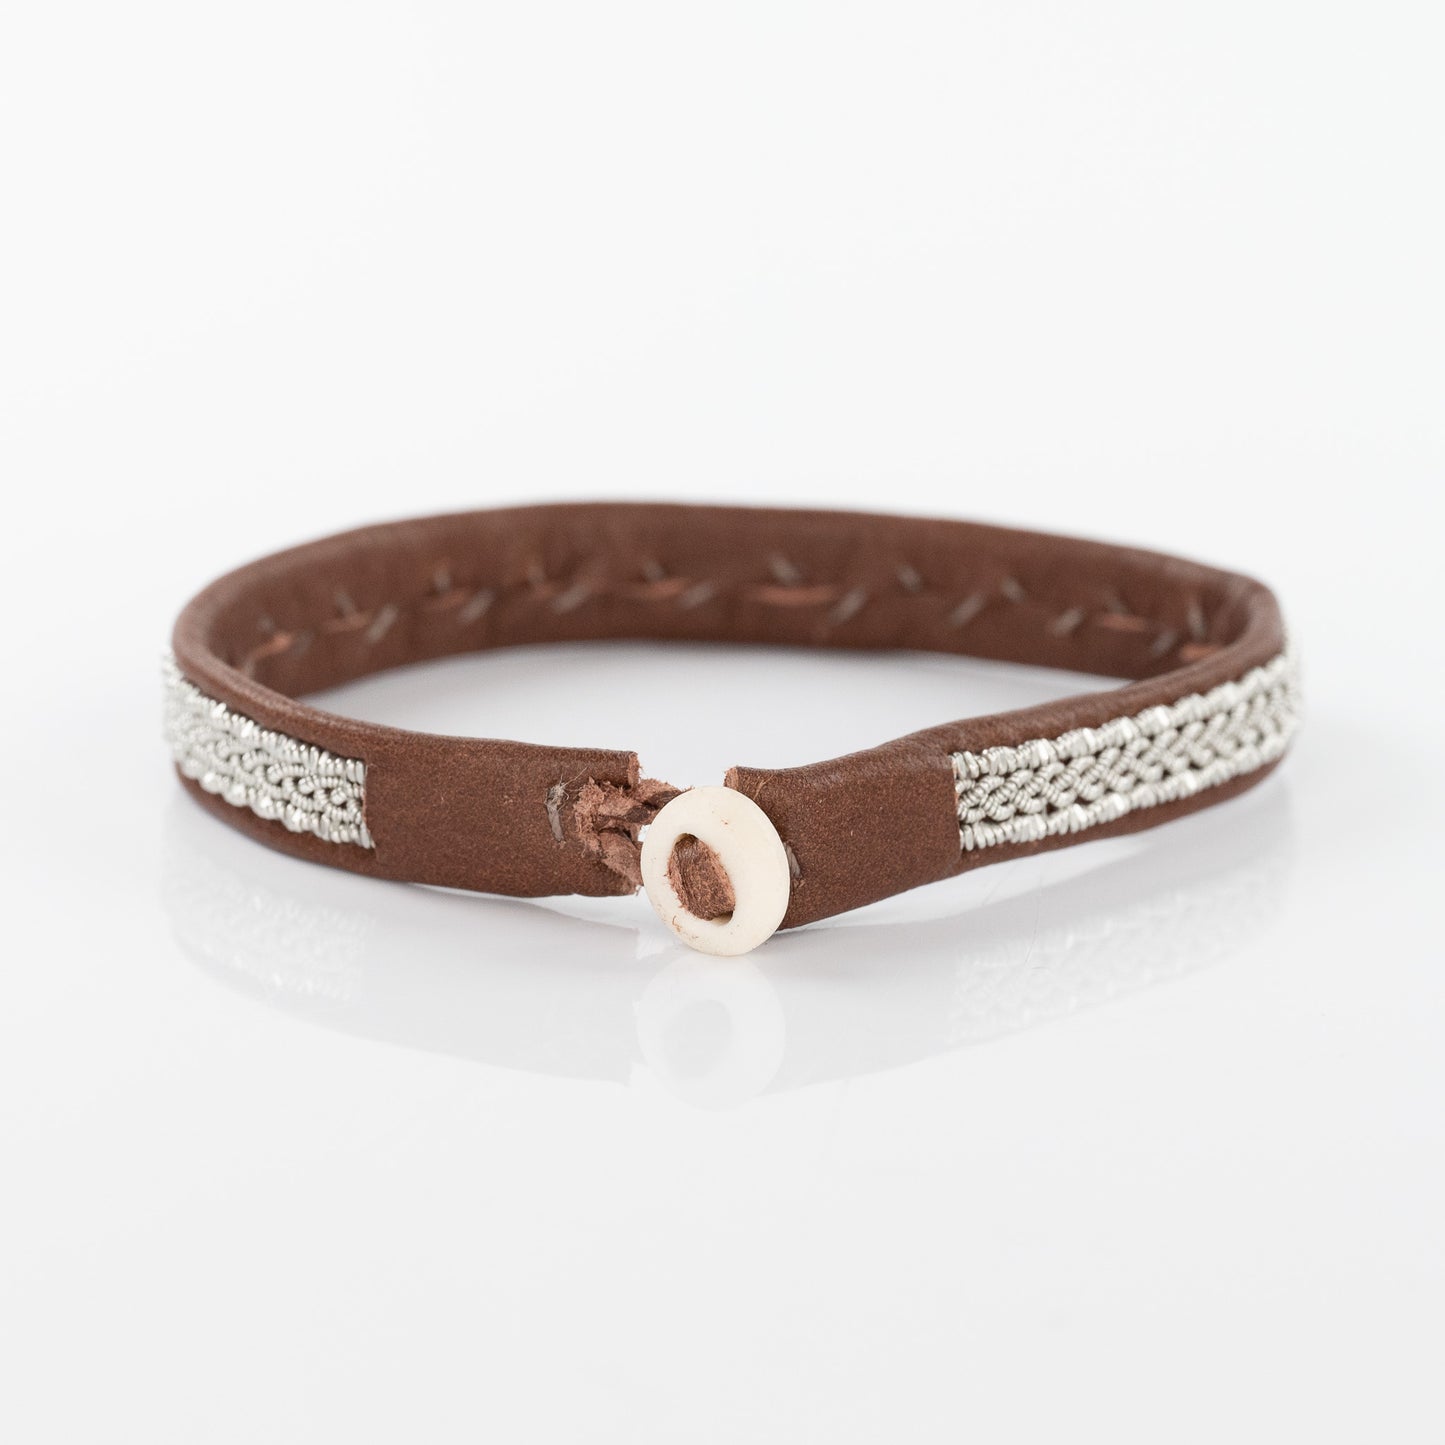 Tindra Braided Chestnut Bracelet with Crimped Coil Boarder